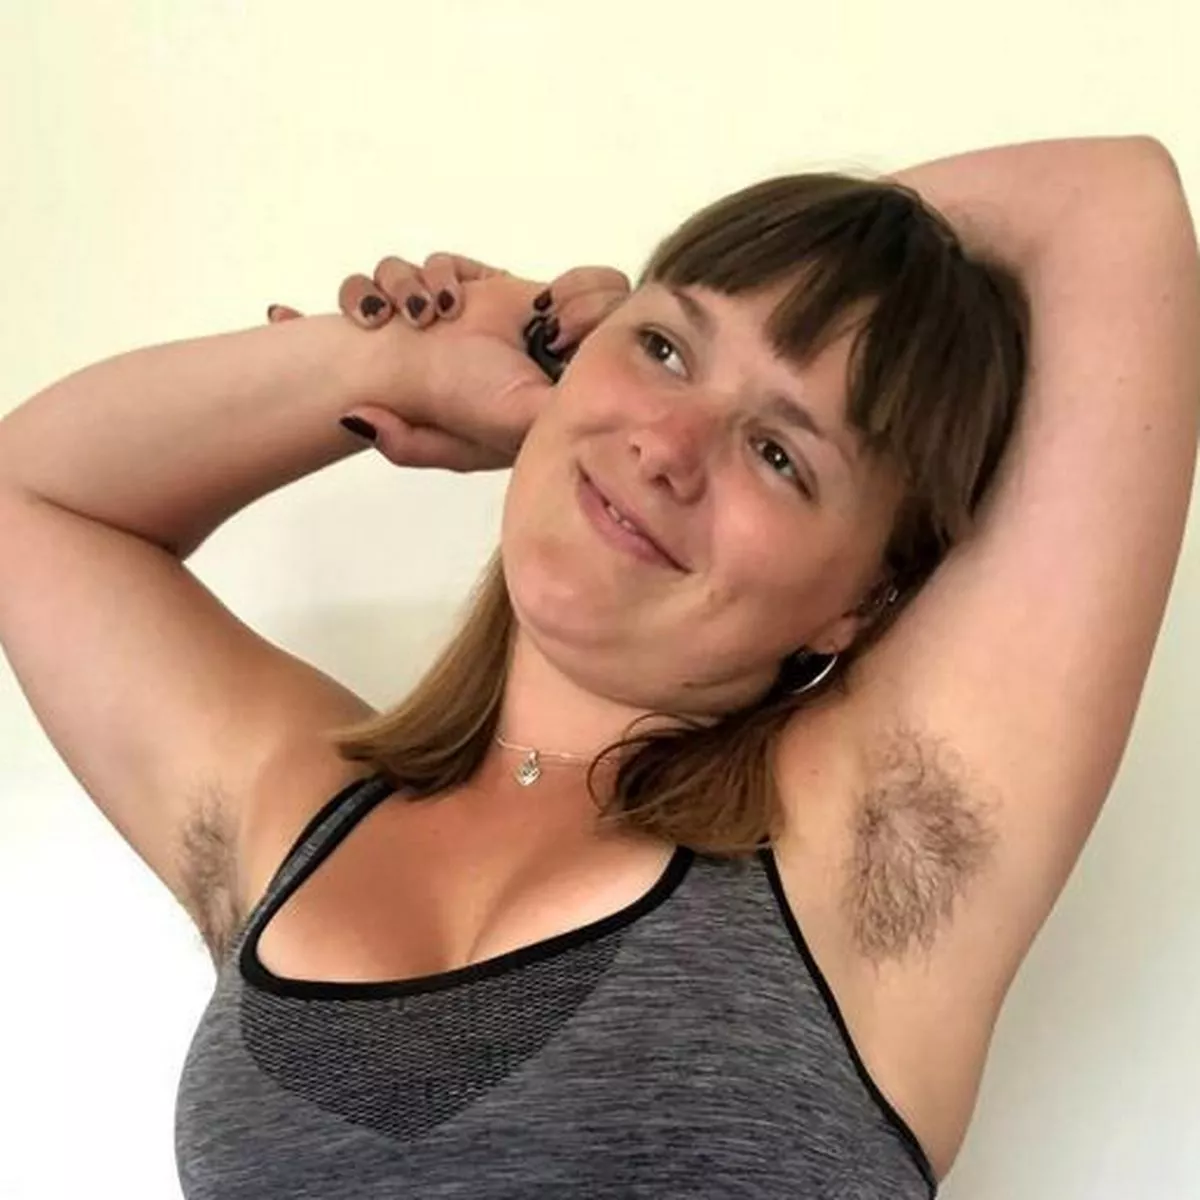 babalwa ngoqo recommends pictures of women with hairy armpits pic